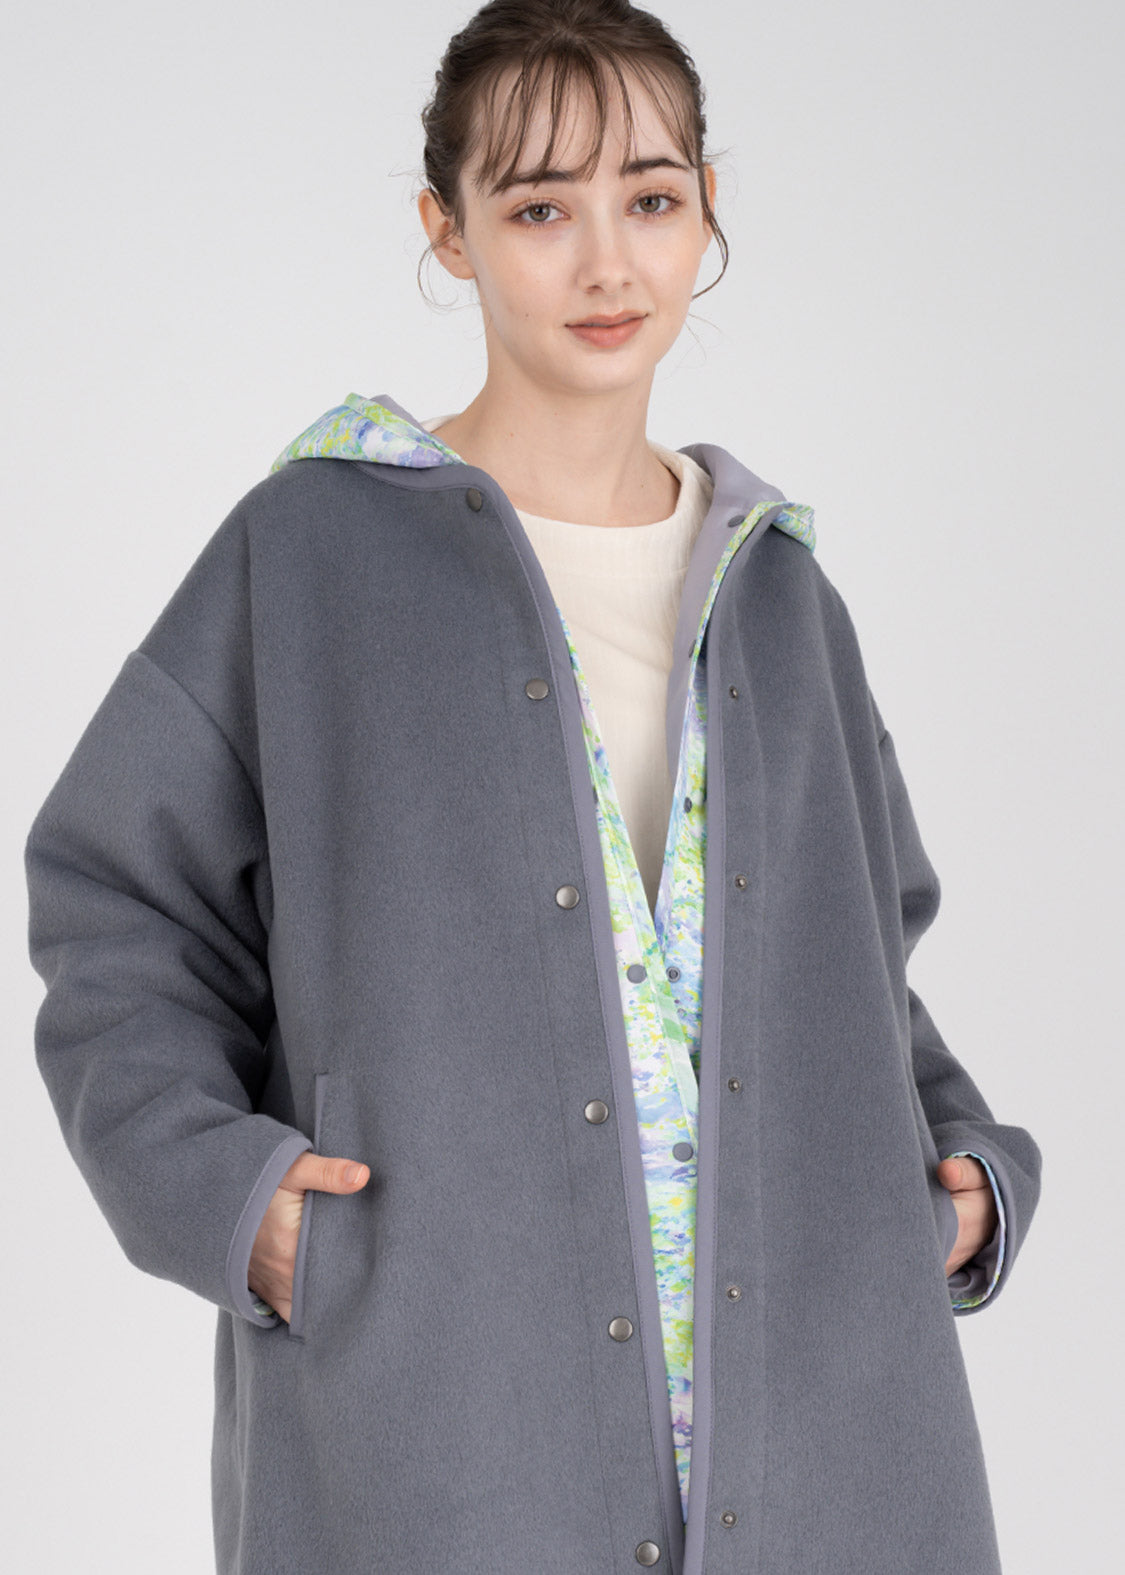 Hooded Long Sleeve Outer (Light and wind)